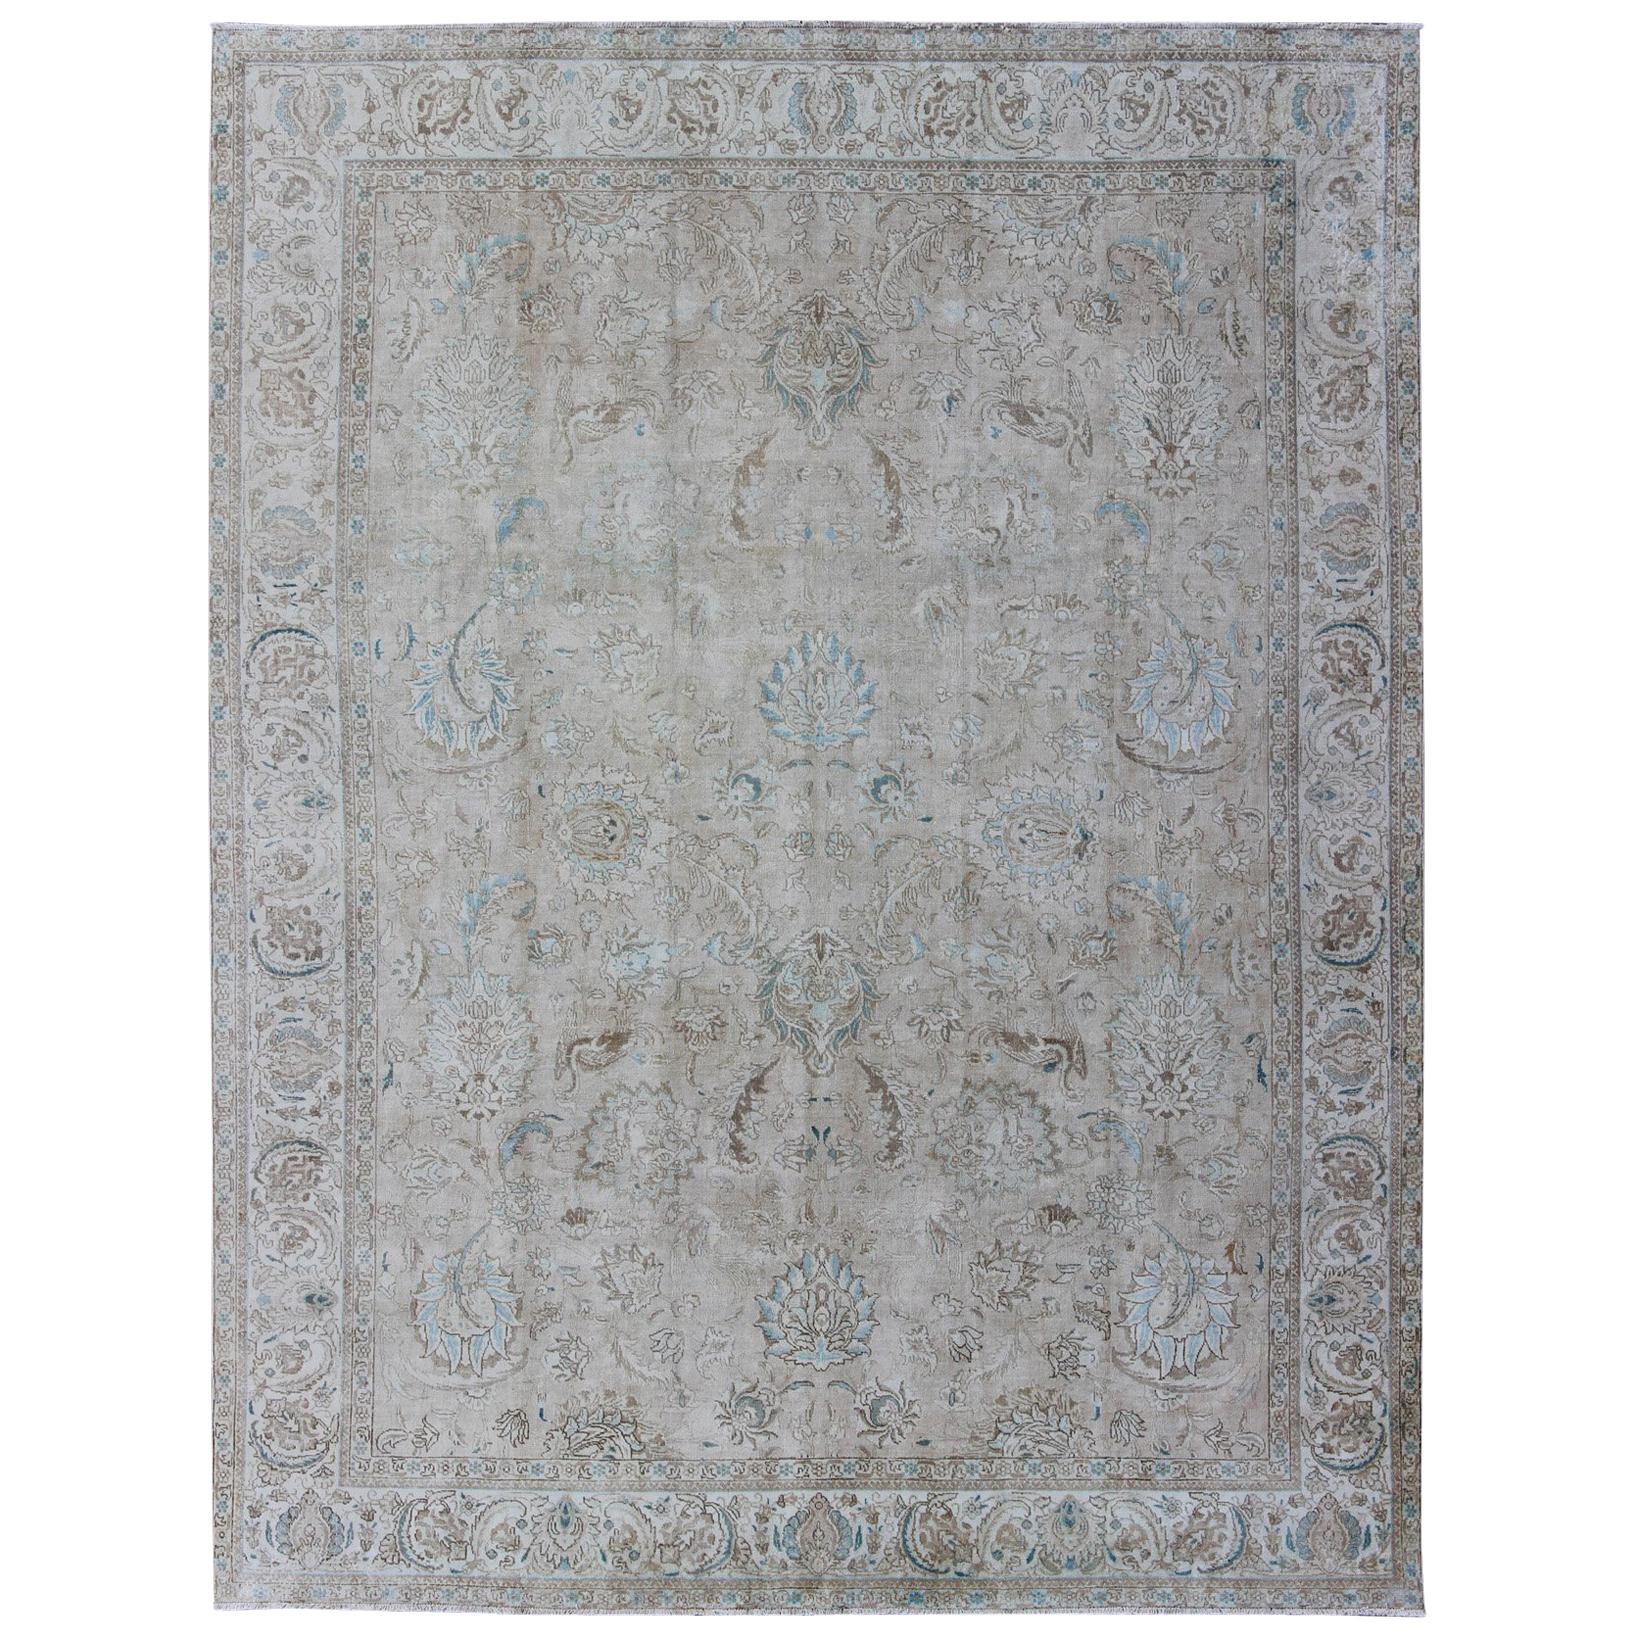 Muted Gray, Blue, and Ivory Vintage Persian Tabriz Rug with Floral Design For Sale